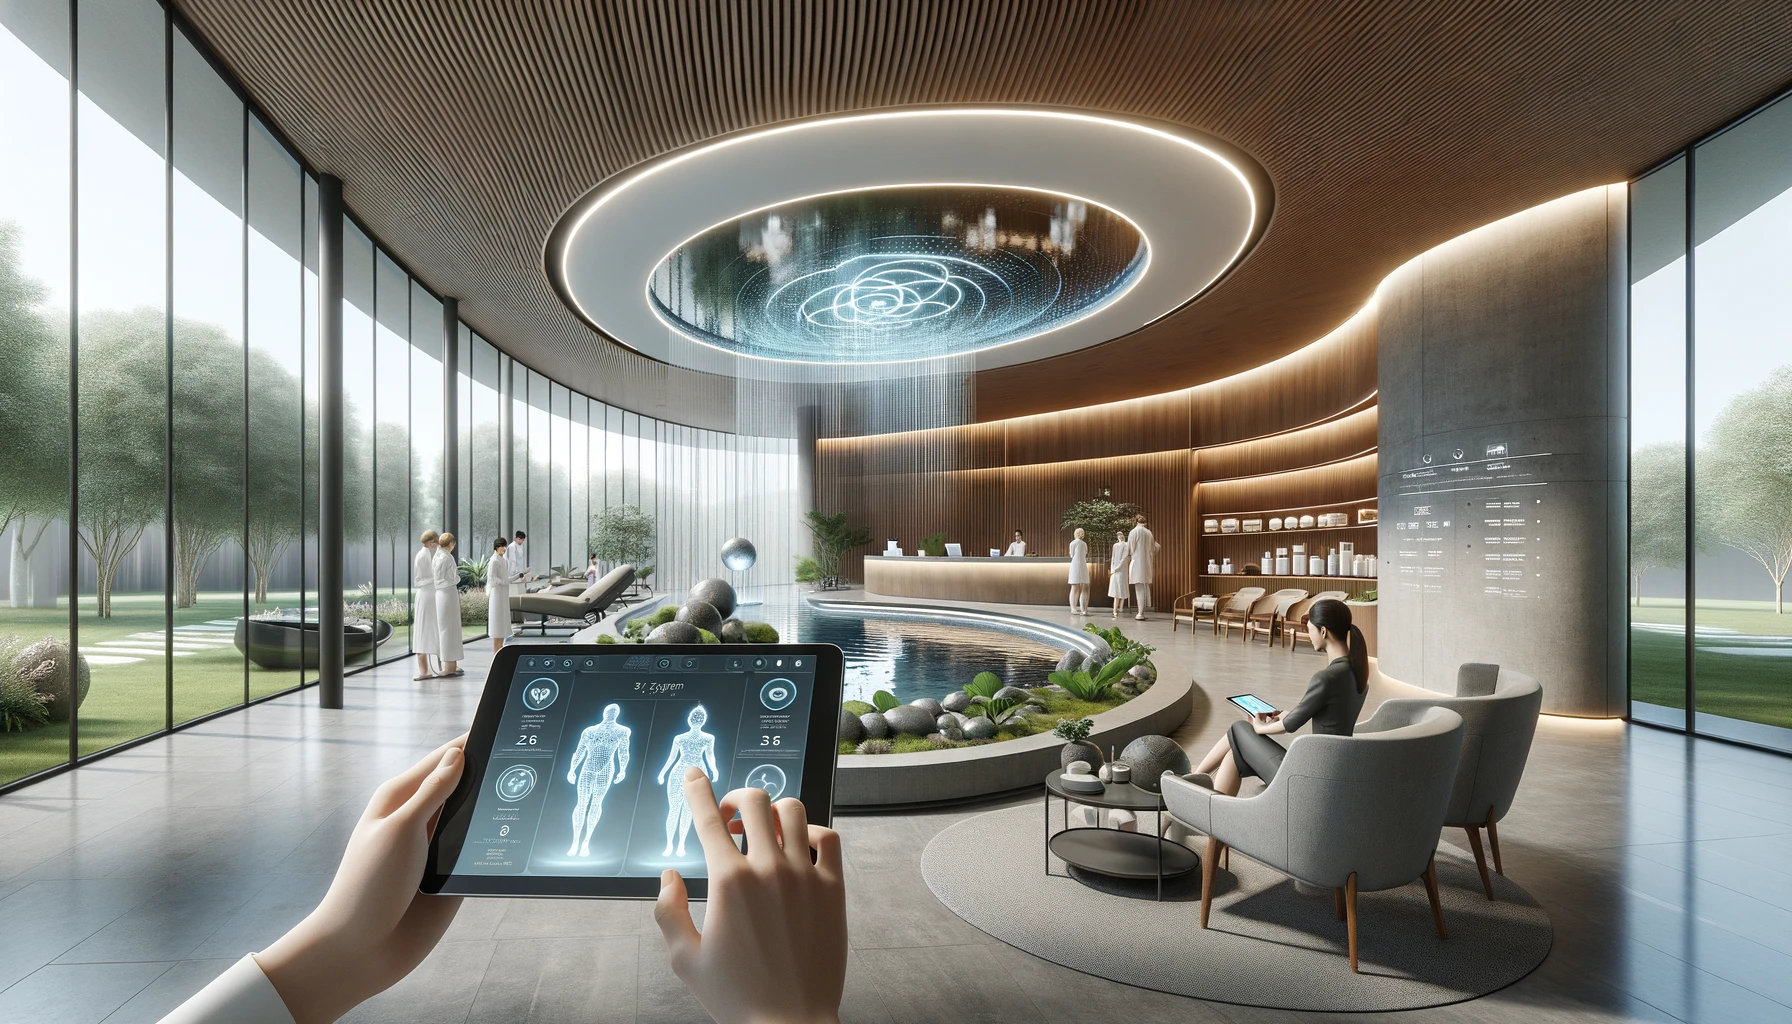 A modern med spa interior with a client using a tablet, a staff member accessing a CRM system, curved walls, floor-to-ceiling windows, natural elements, and a serene atmosphere.